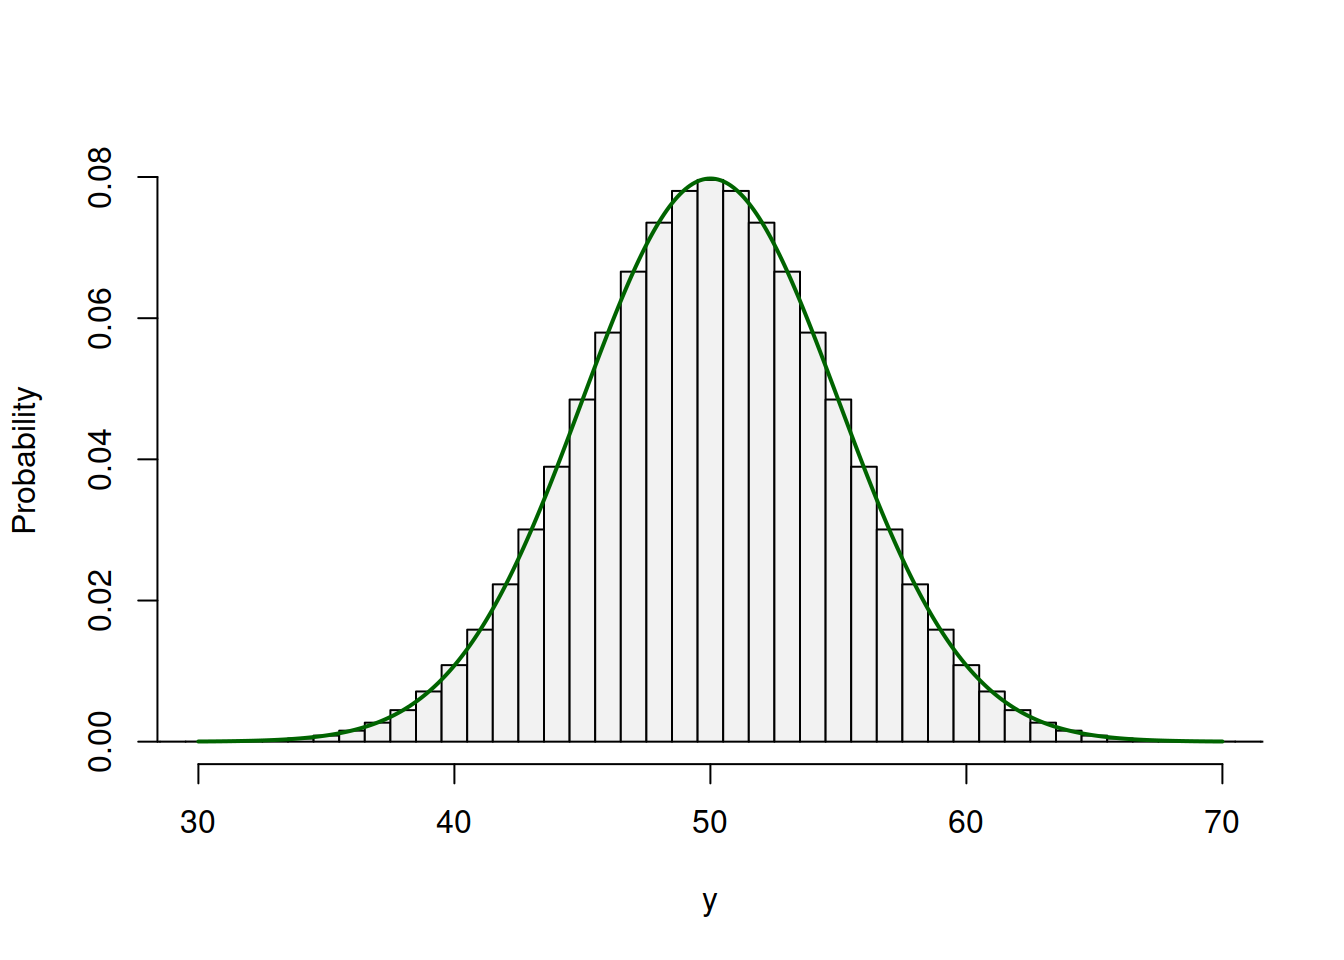 Binomial distribution and its approximation via the Normal one.